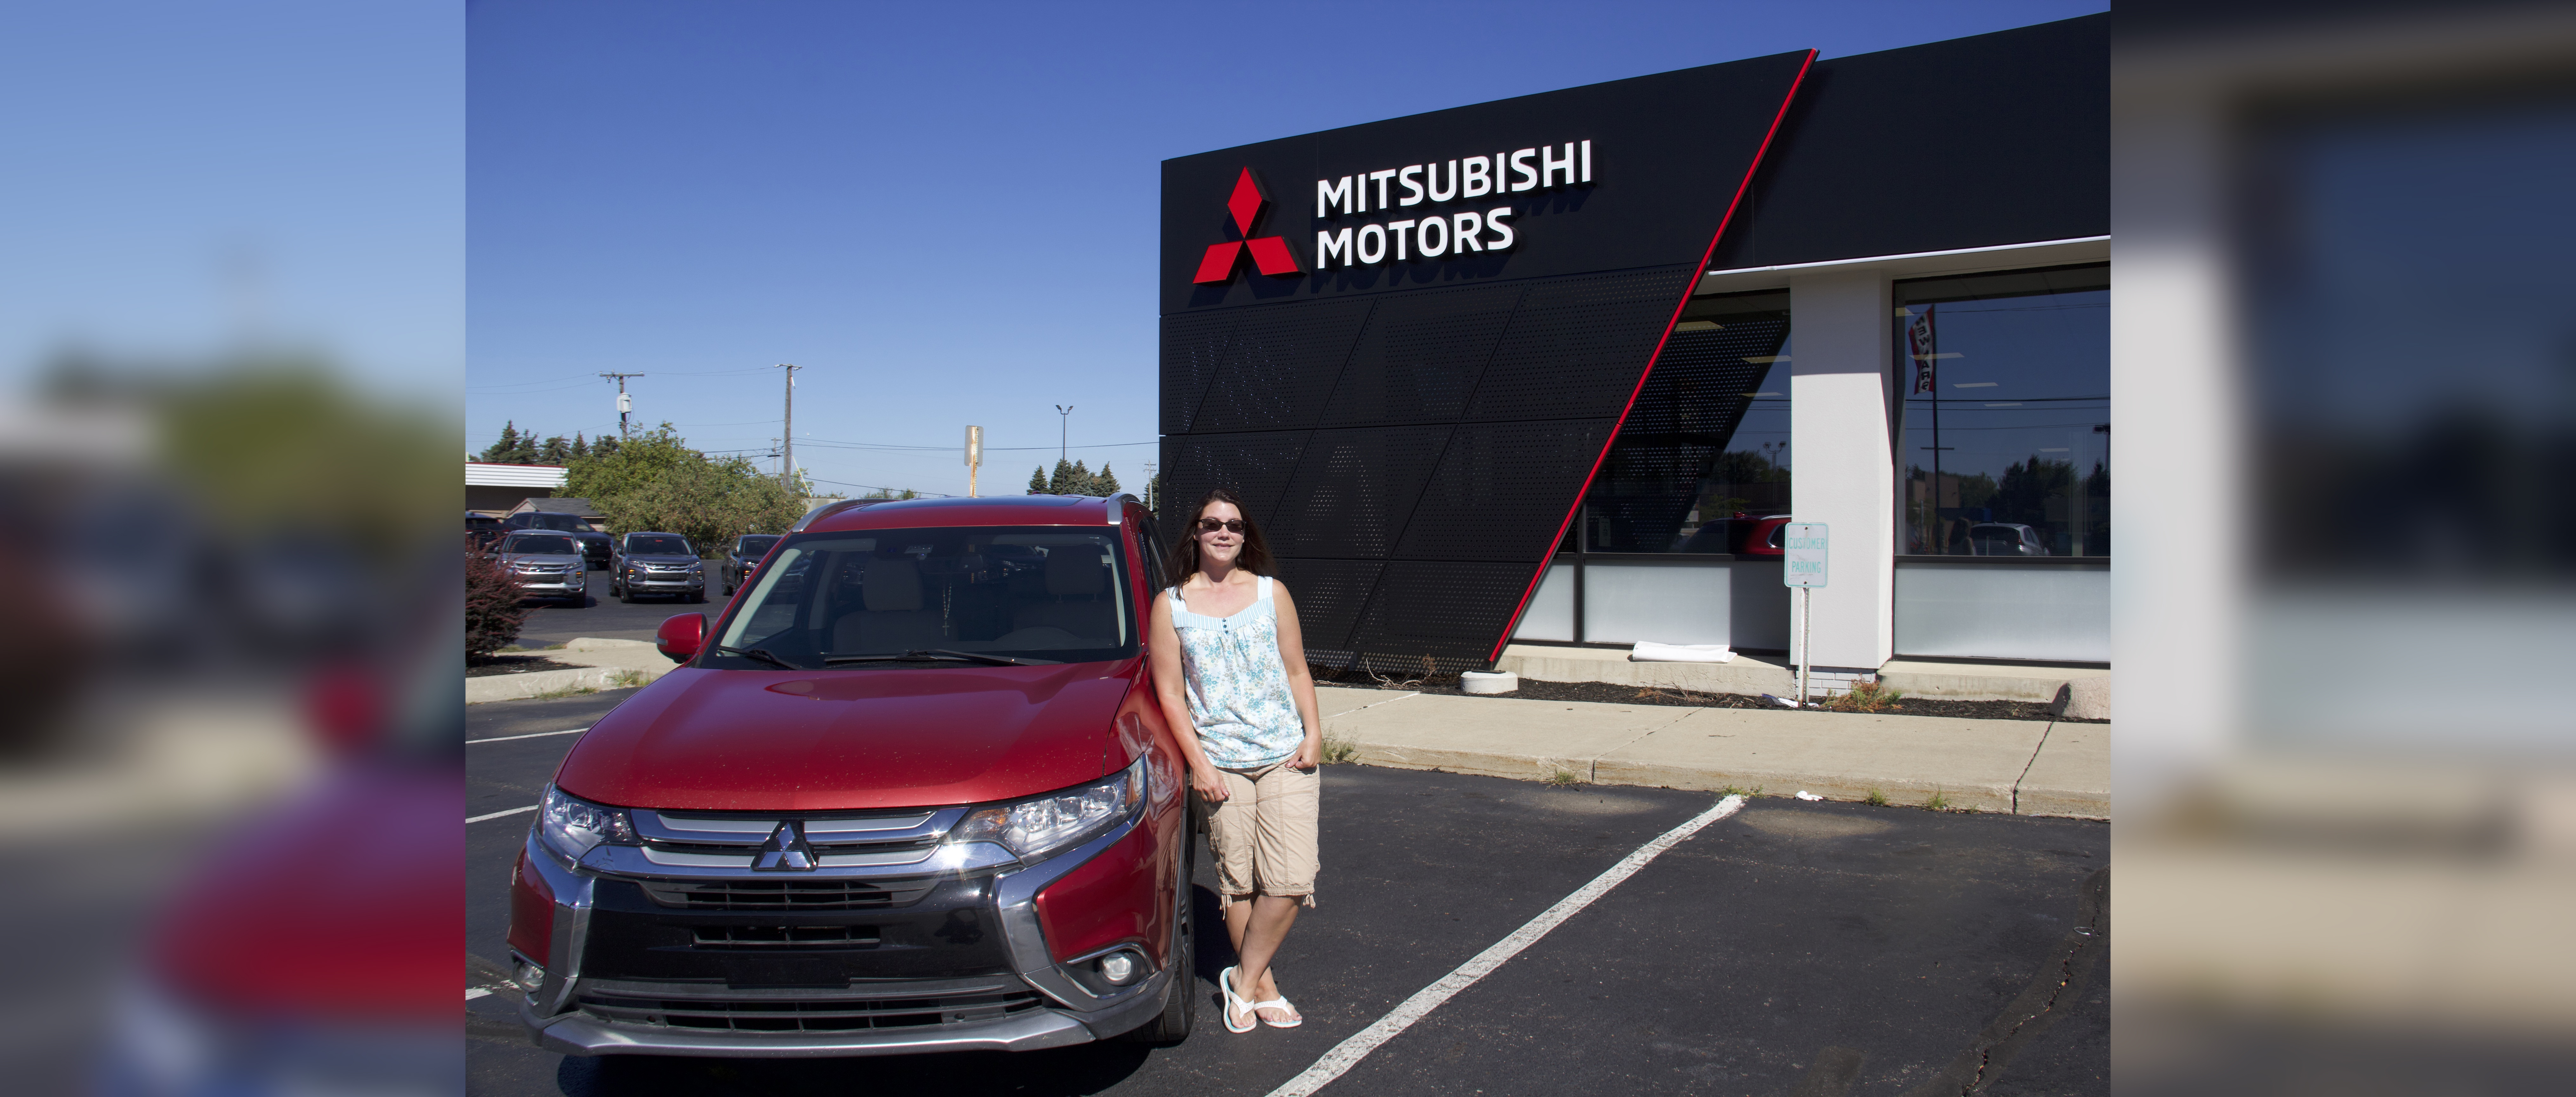 Mitsubishi Motors North America, Inc. (MMNA) constantly draws inspiration from the stories of its loyal customers.